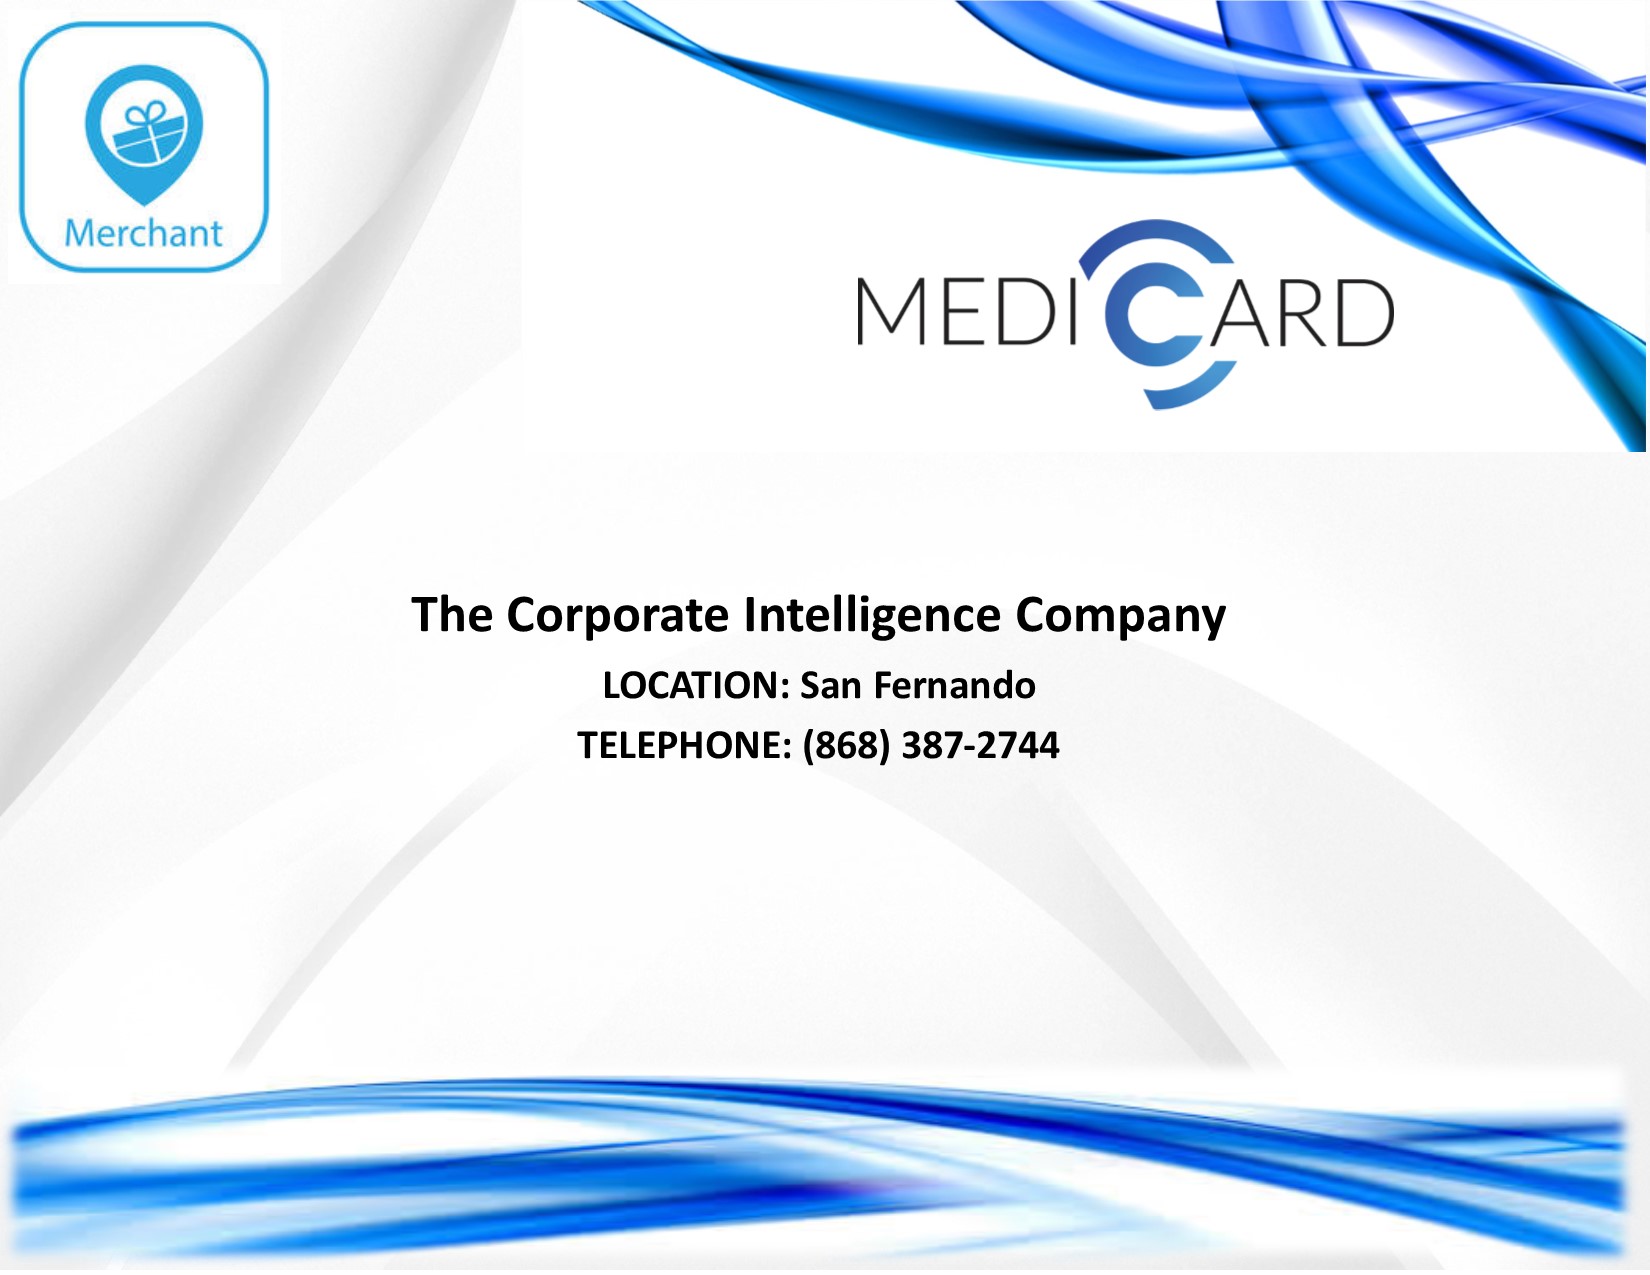 The Corporate Intelligence Company